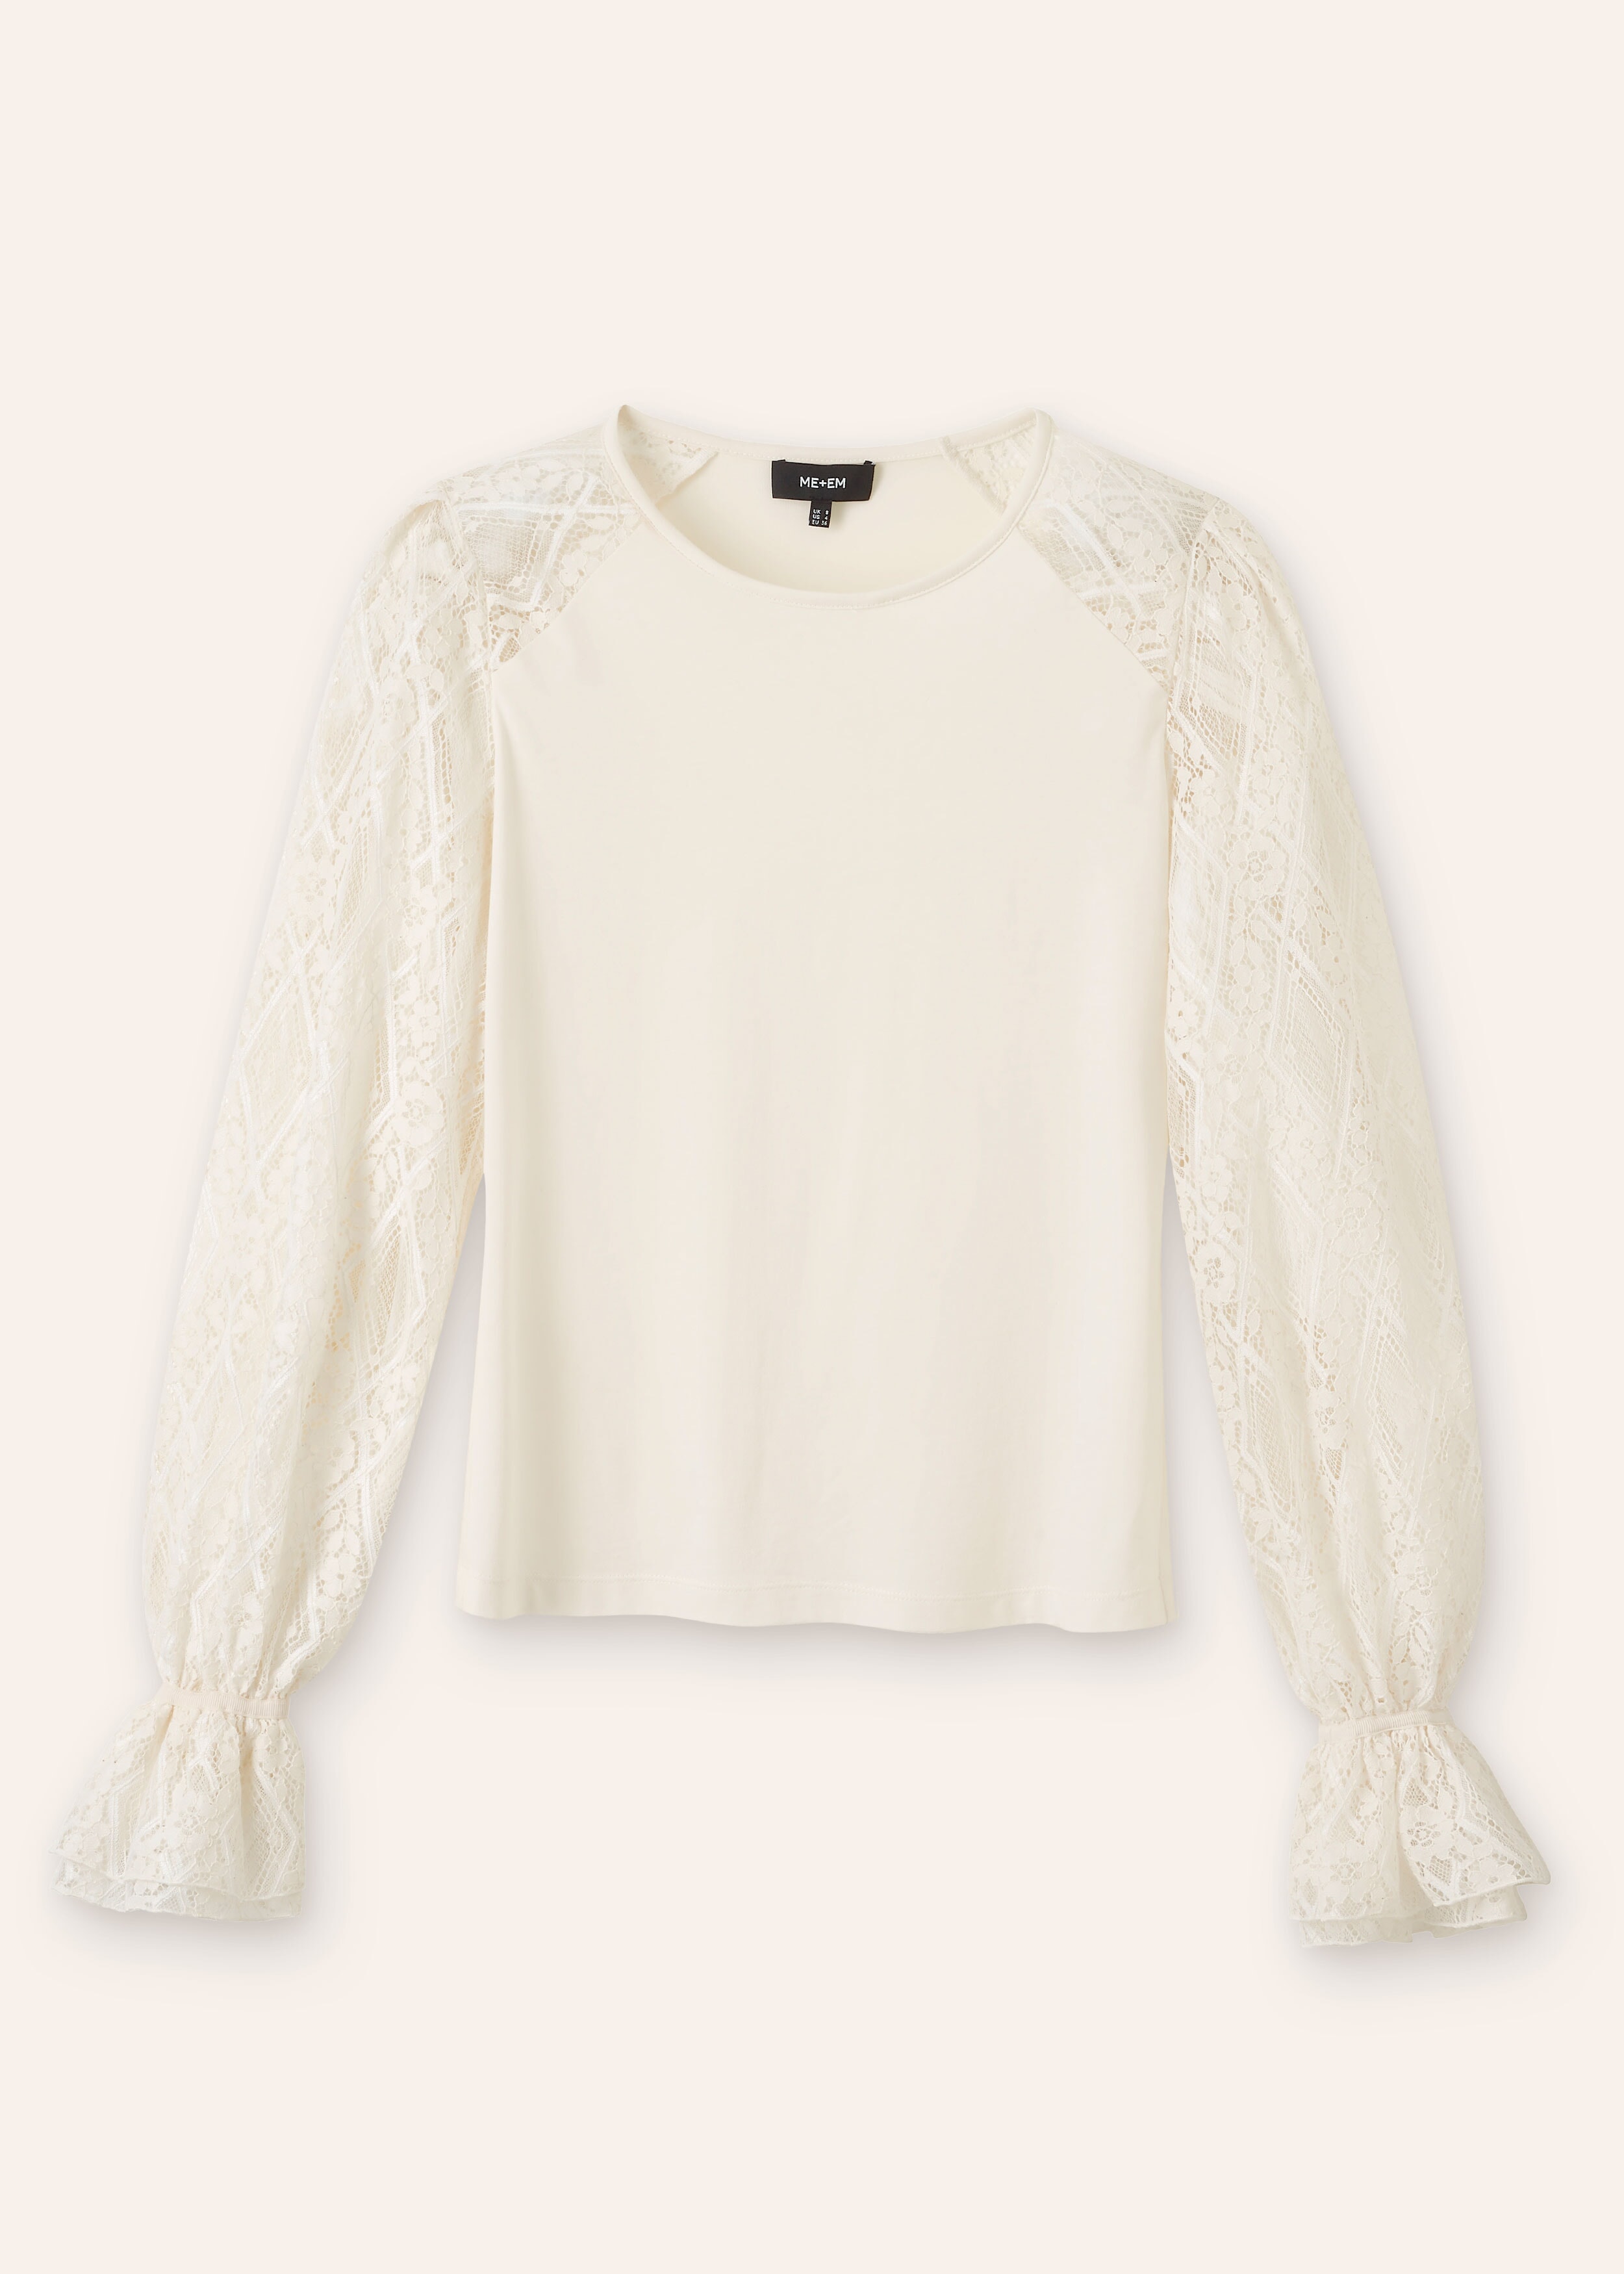 Antique Lace Sleeve Layering Top Cream/Soft White